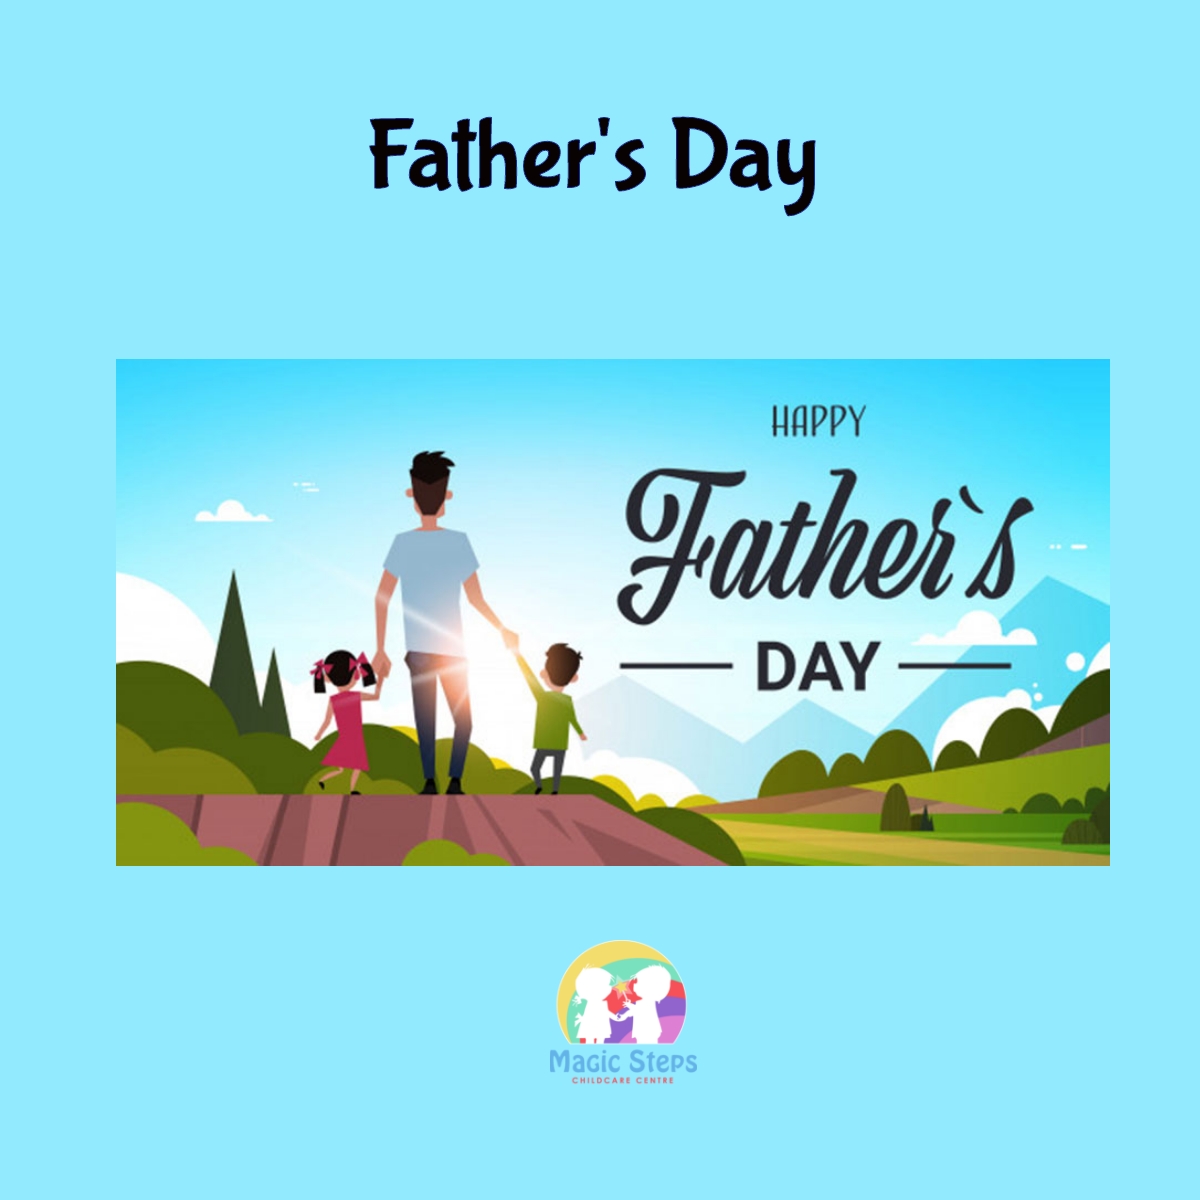 Father's Day- Friday 17th June